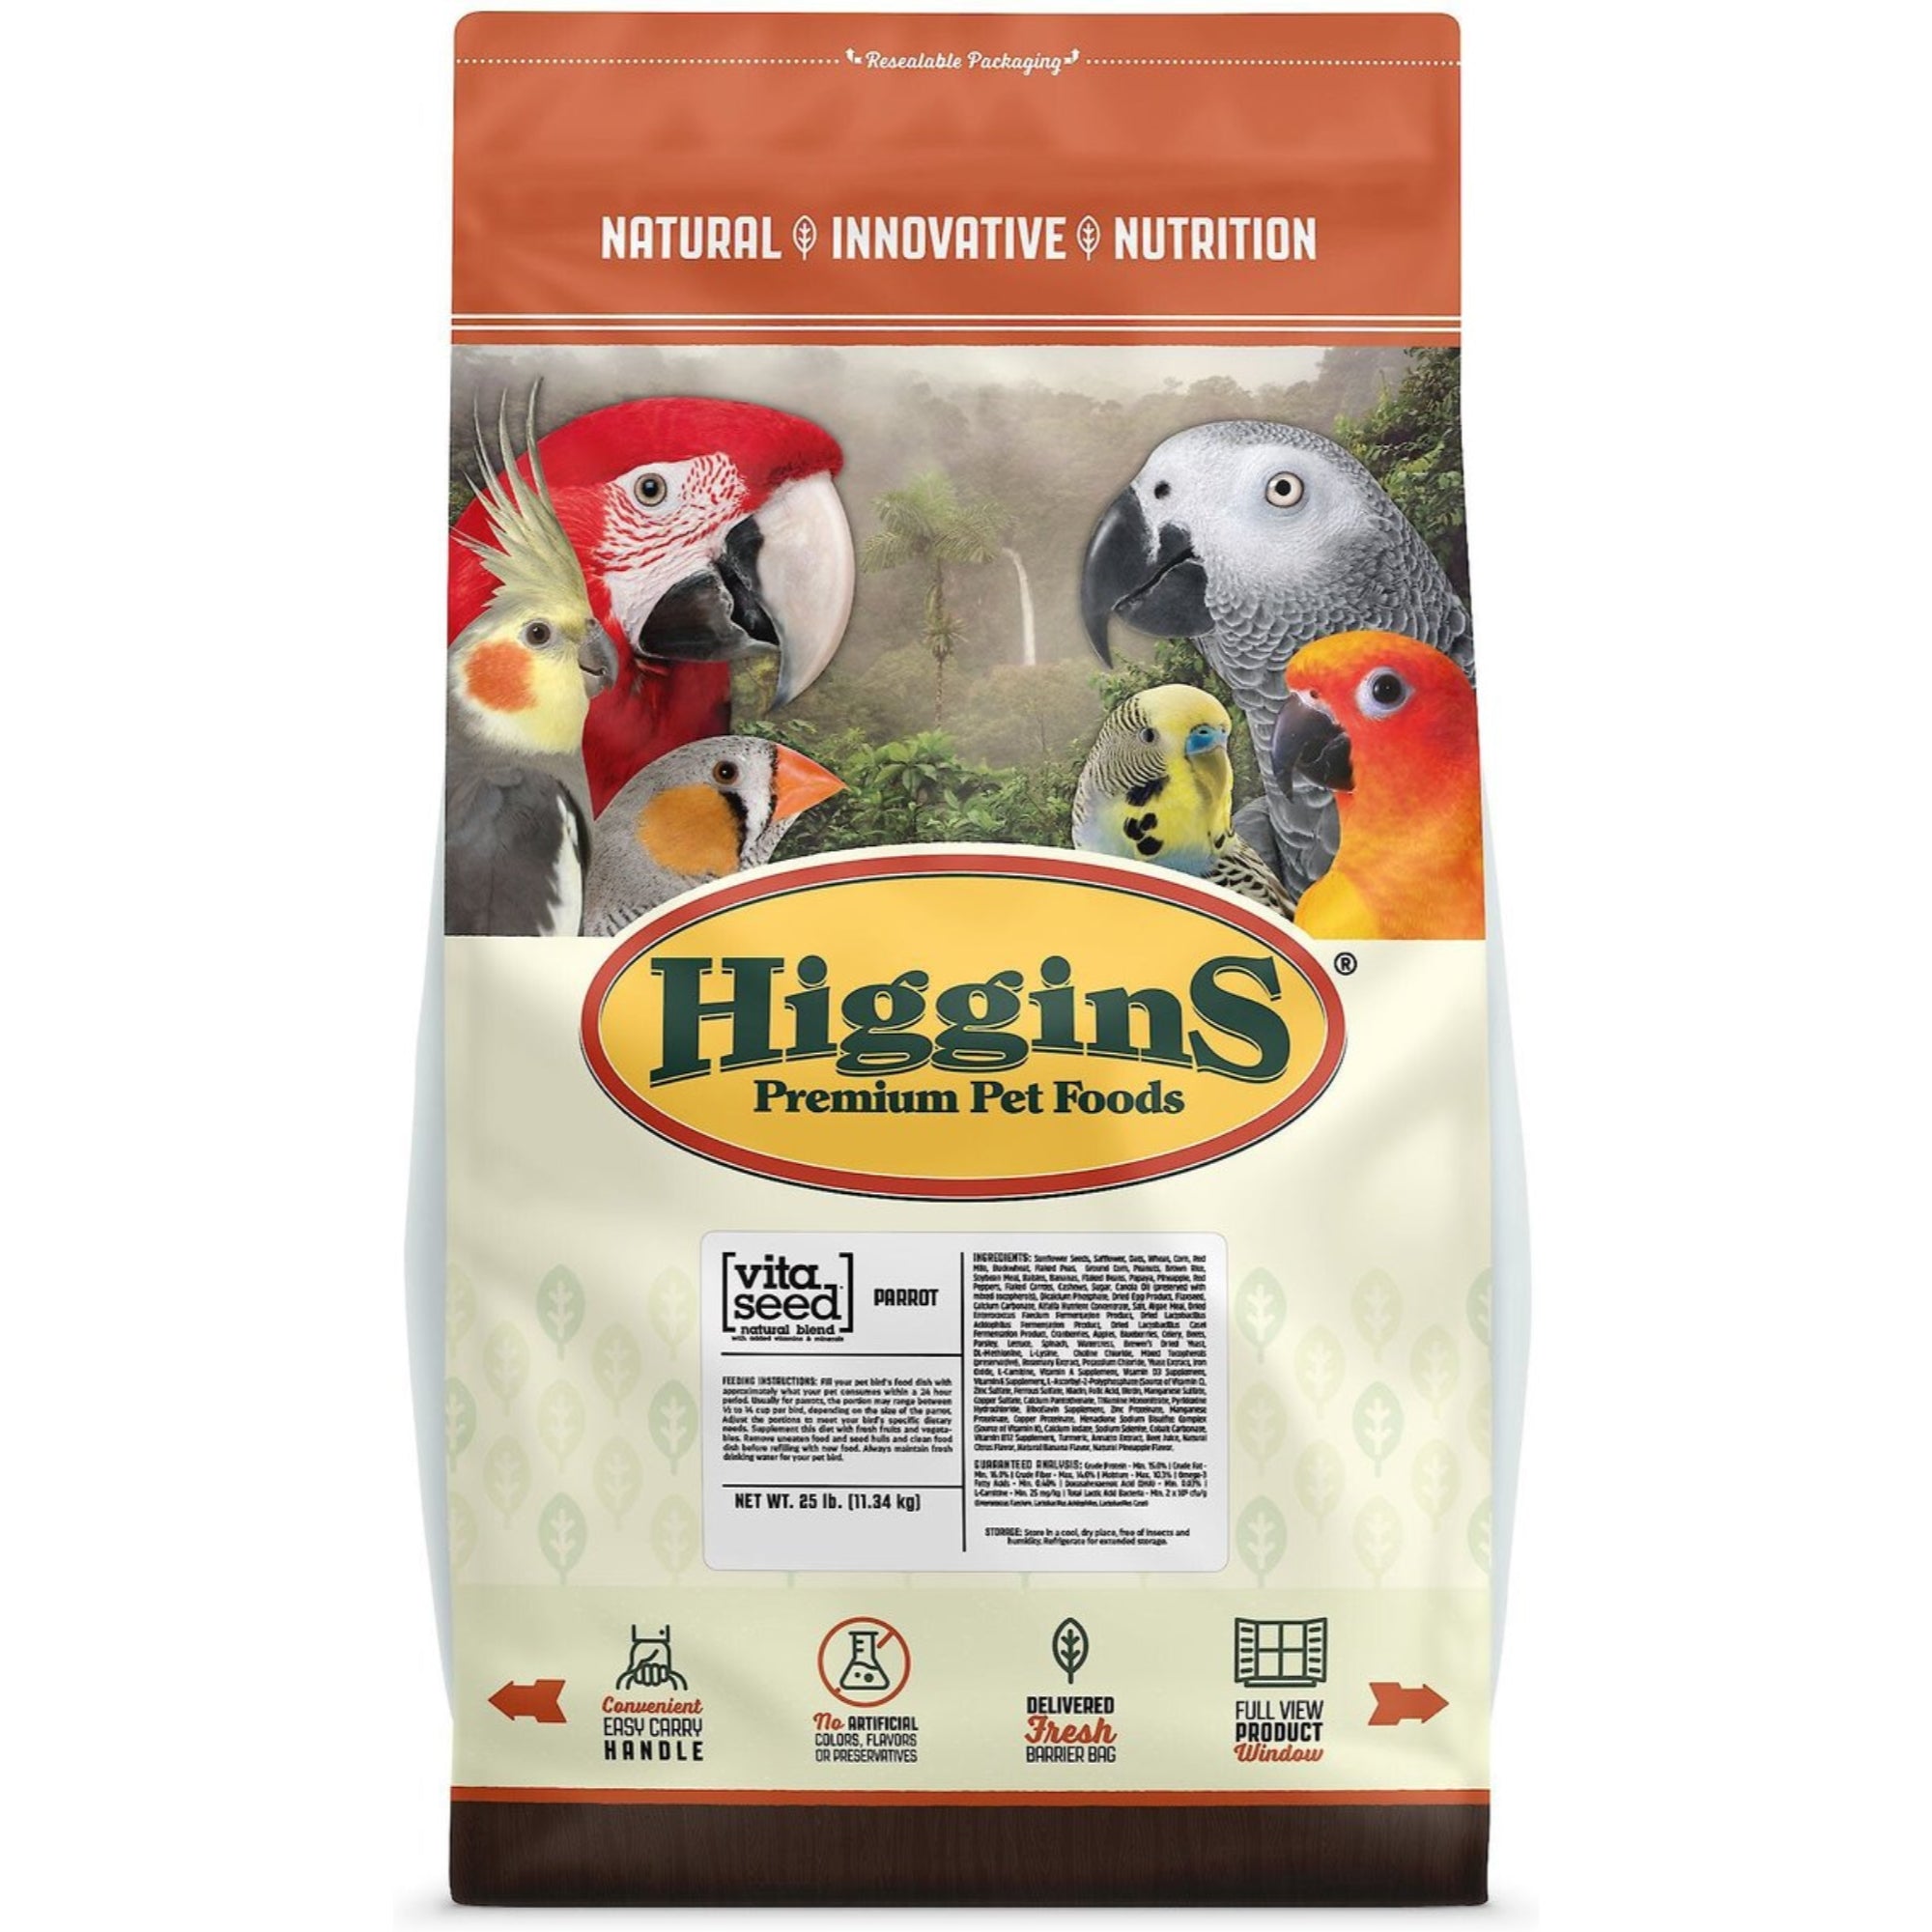 Higgins Vita Seed Natural Blend with Added Vitamins and Minerals for Parrots, 25lbs